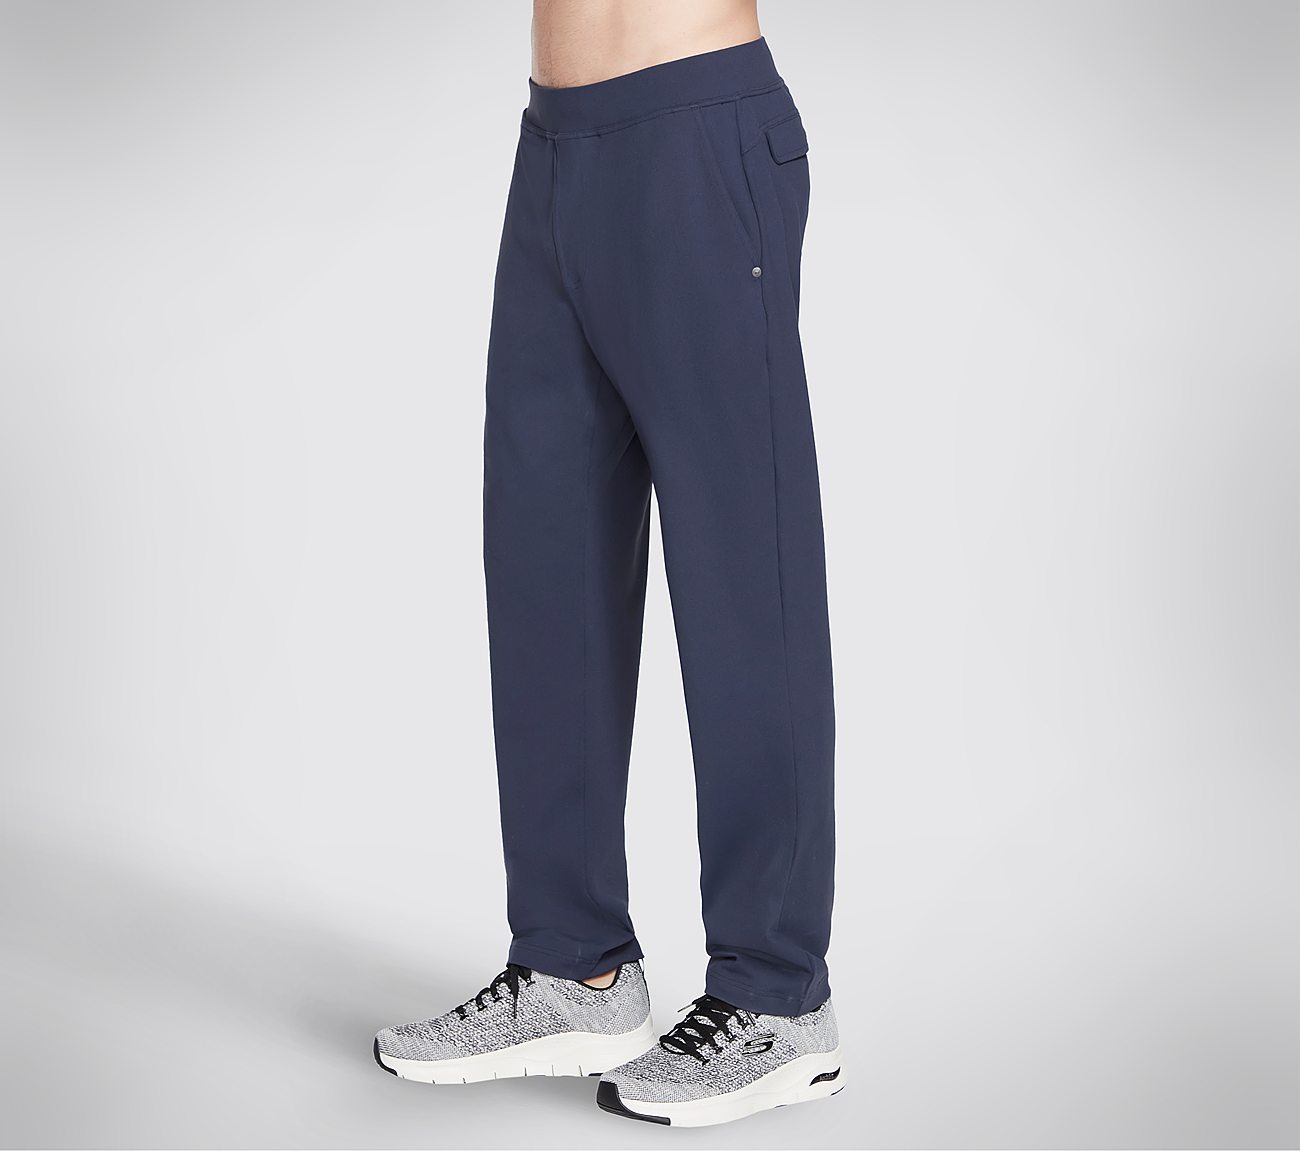 THE GOWALK PANT RECHARGE, NNNAVY Apparels Bottom View